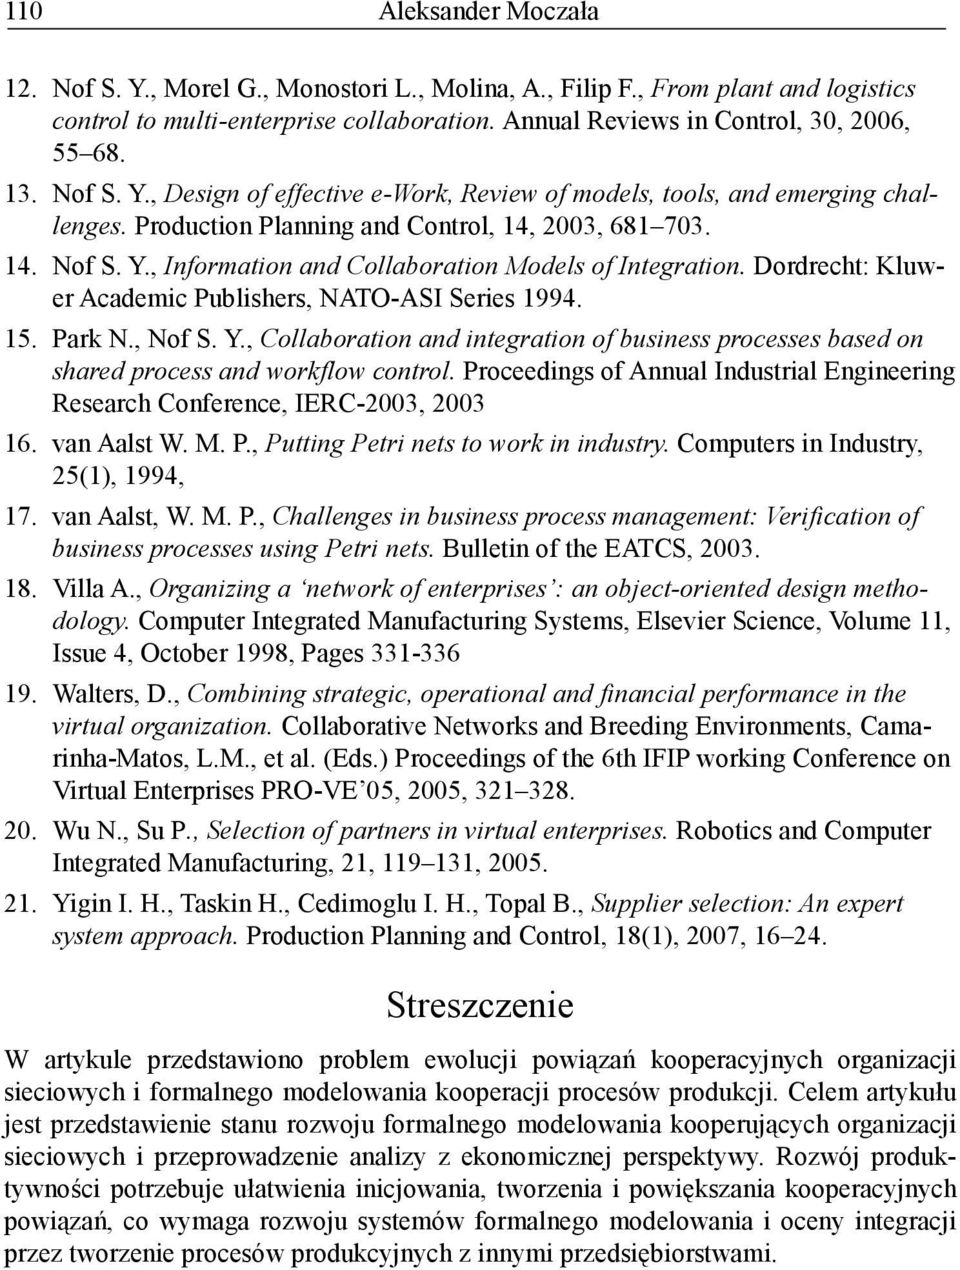 Proceedings of Annul Industril Engineering Reserch Conference, IERC-2003, 2003 16. vn Alst W. M. P., Putting Petri nets to work in industry. Computers in Industry, 25(1), 1994, 17. vn Alst, W. M. P., Chllenges in usiness process mngement: Verifiction of usiness processes using Petri nets.